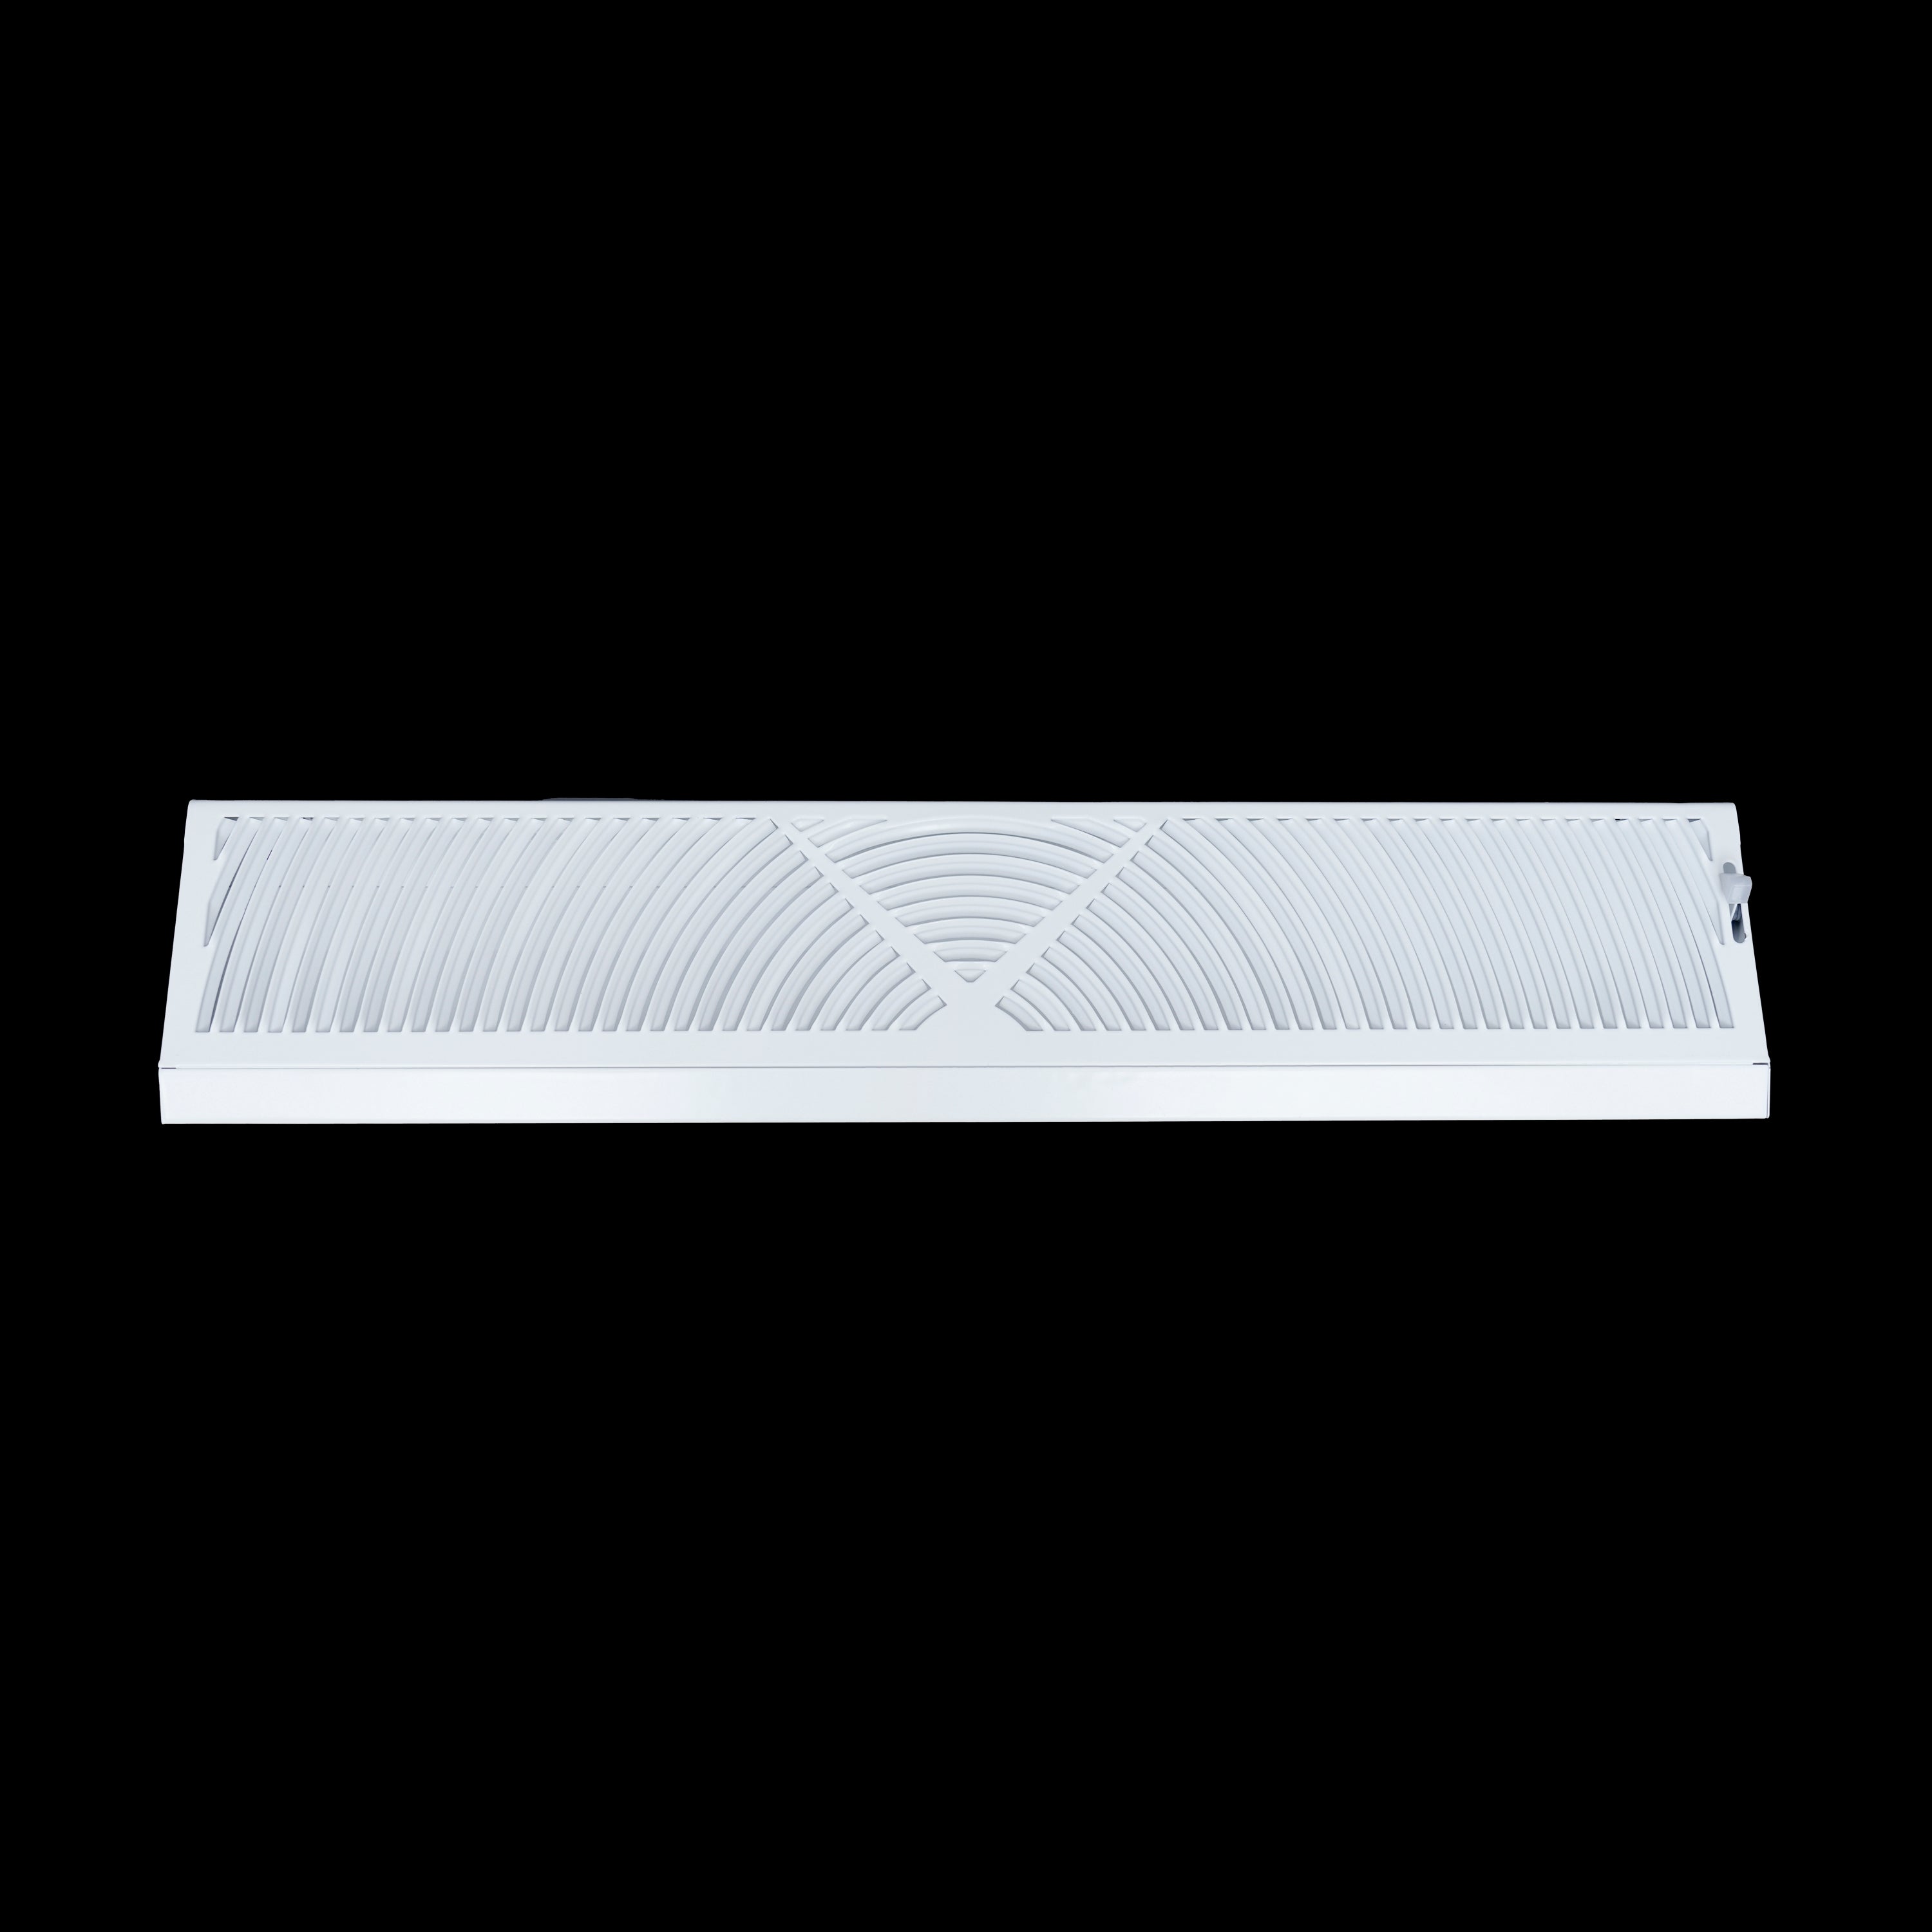 24" Corner Baseboard Return Air Grille | Round Type Air Flow Design | Register Vent Cover Grill | Adjustable Lever for Air Flow Control | White